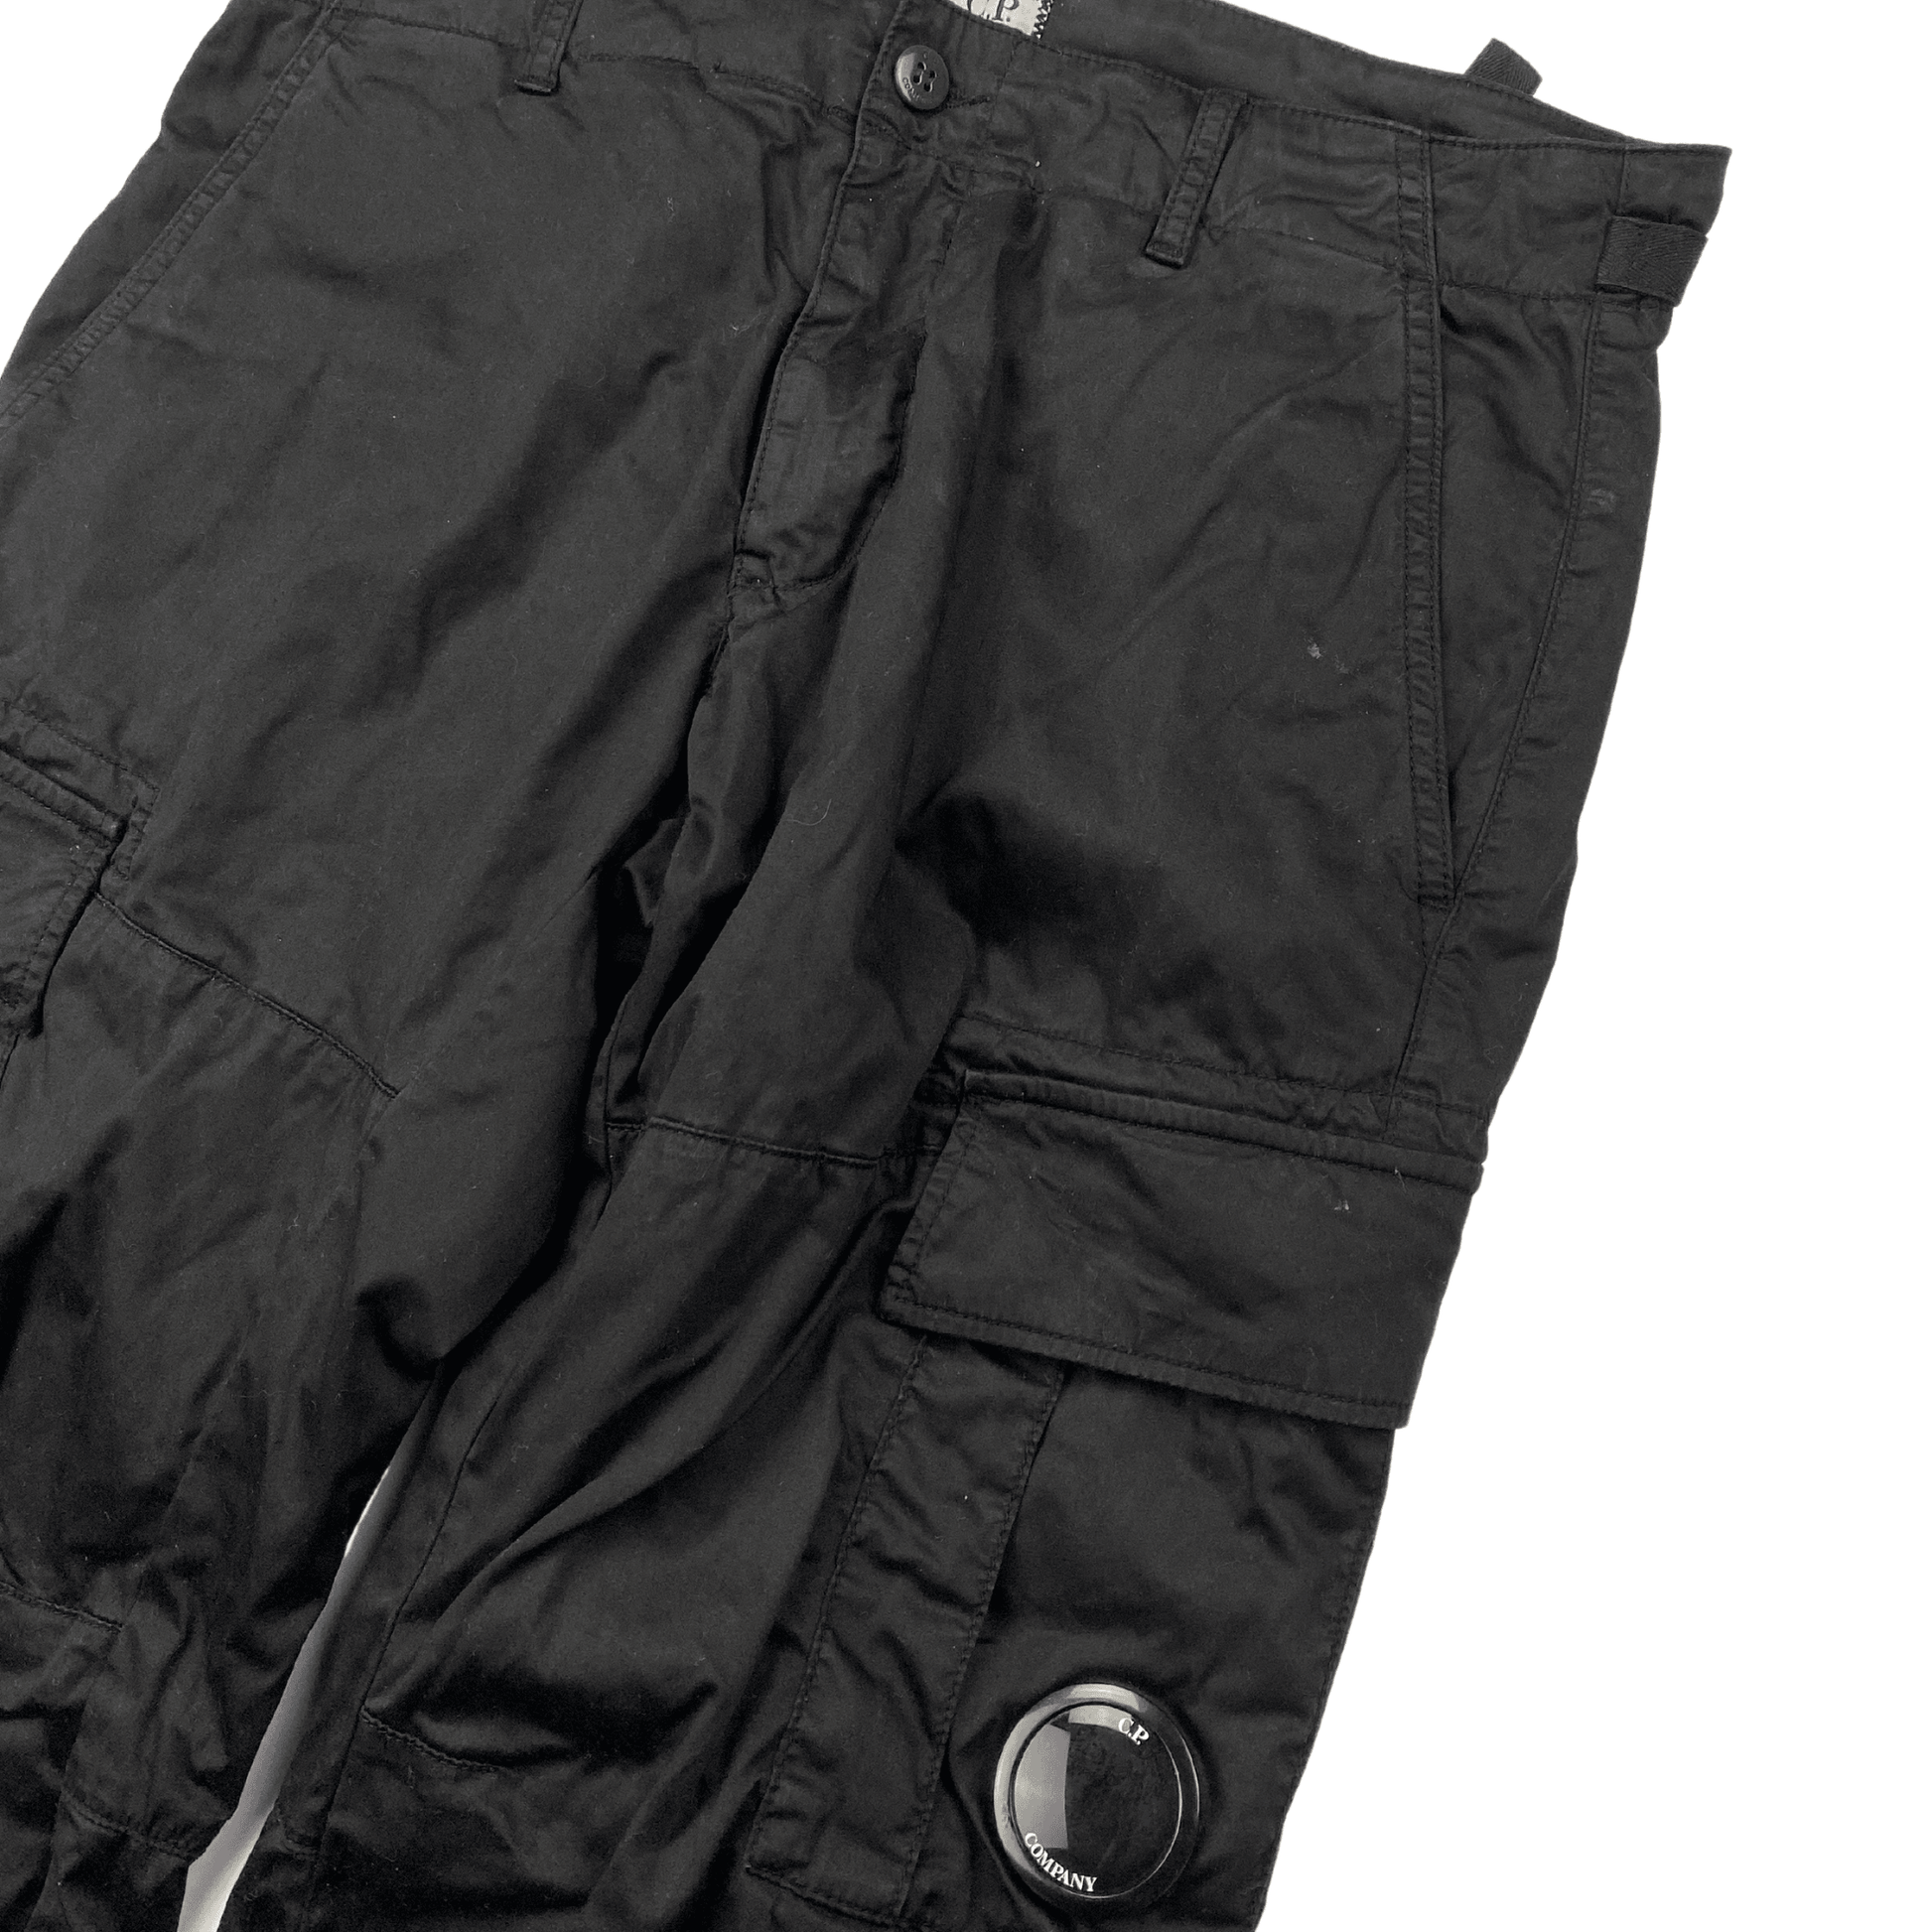 CP COMPANY COMBAT PANTS - Known Source